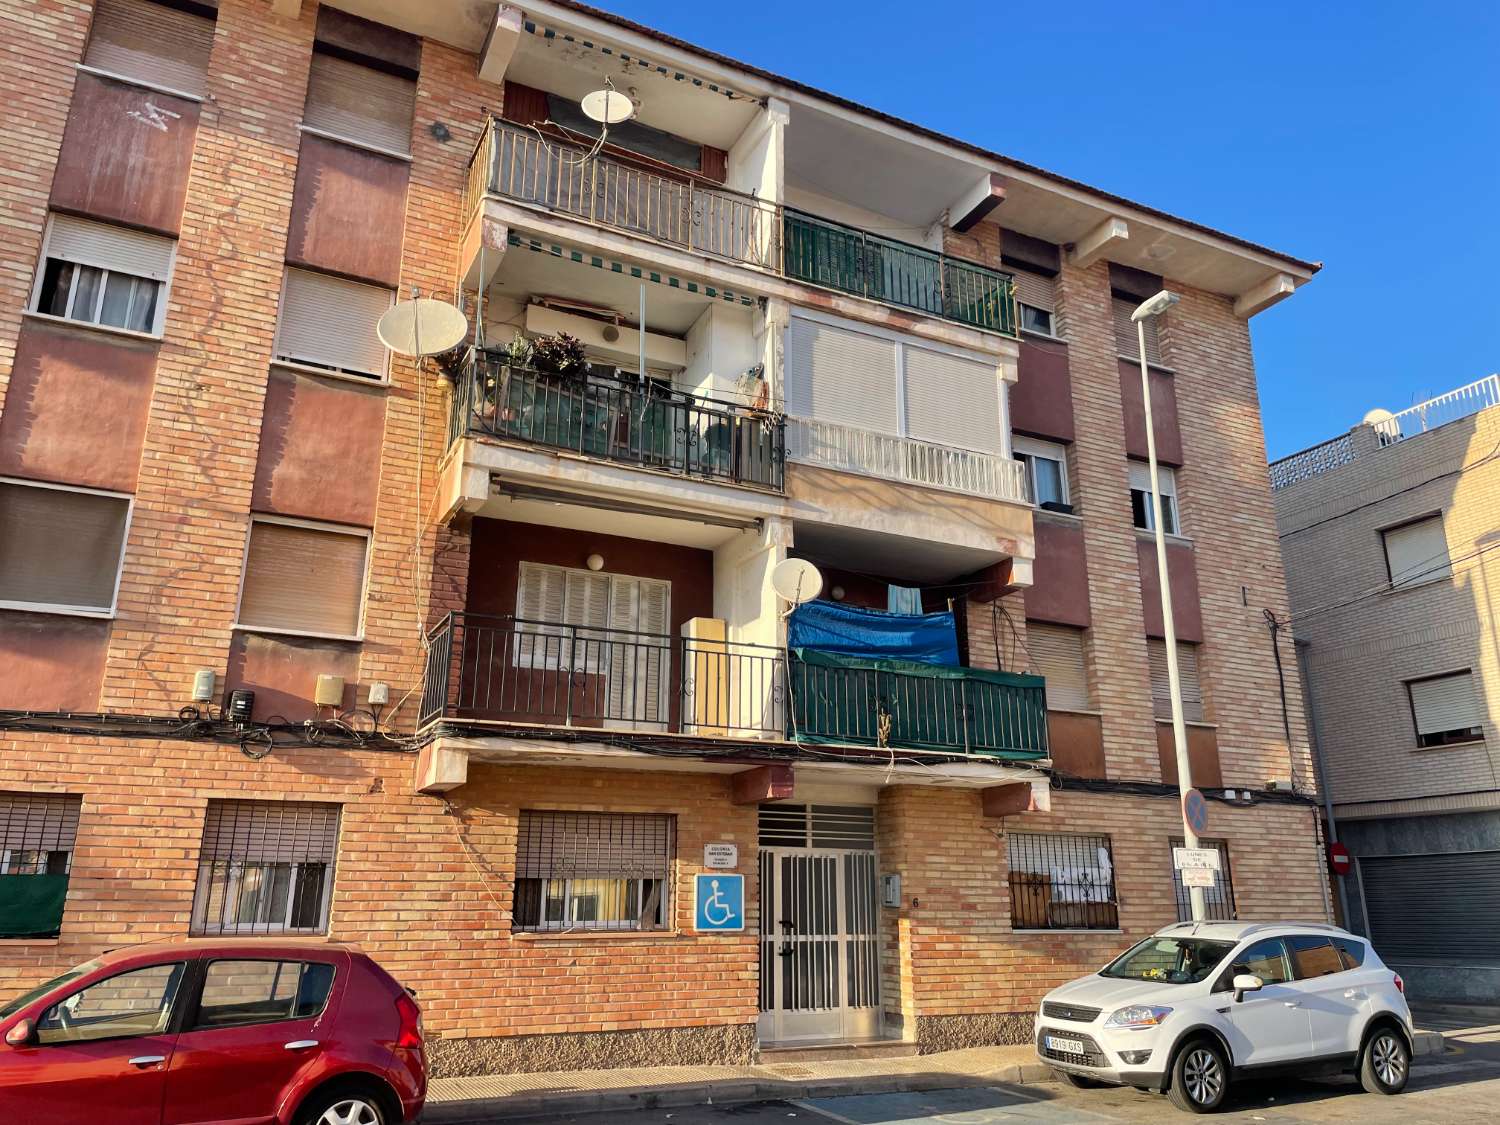 CHANCE!! APARTMENT TO REFORM, 3 BEDROOMS IN SAN PEDRO DEL PINATAR!!